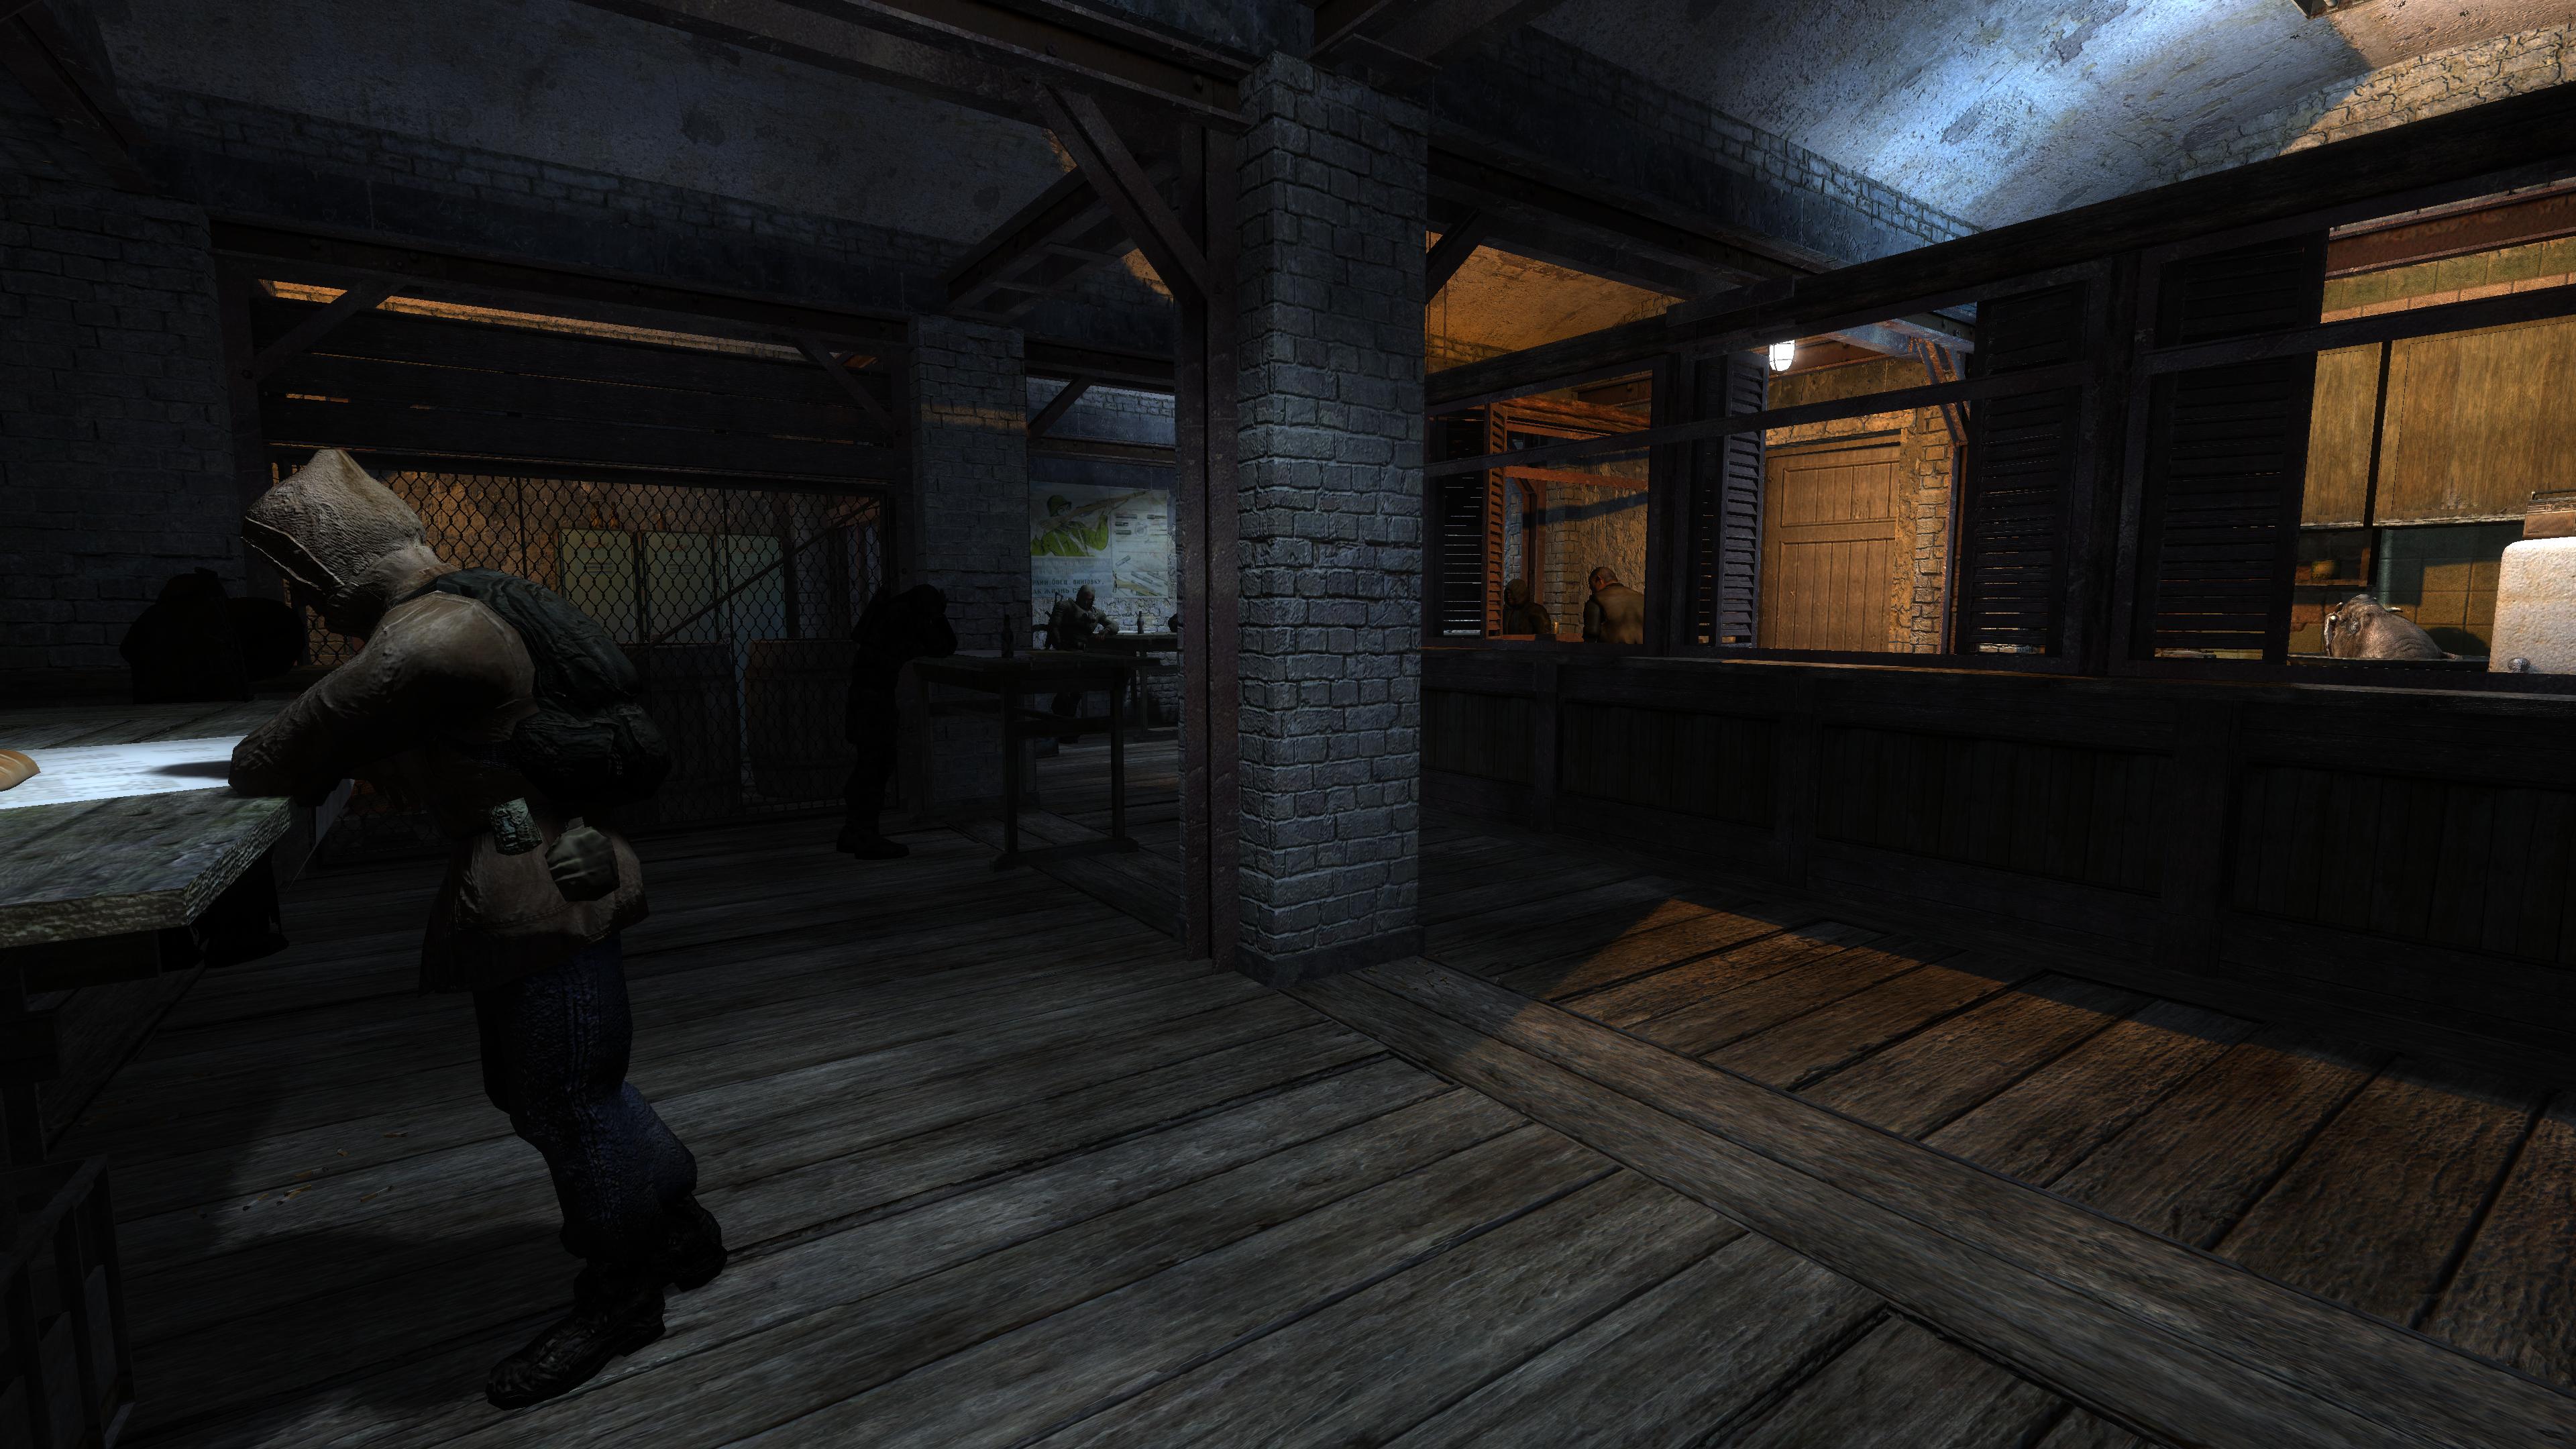 S.T.A.L.K.E.R. 2's irradiated world is dreadfully peaceful, if a